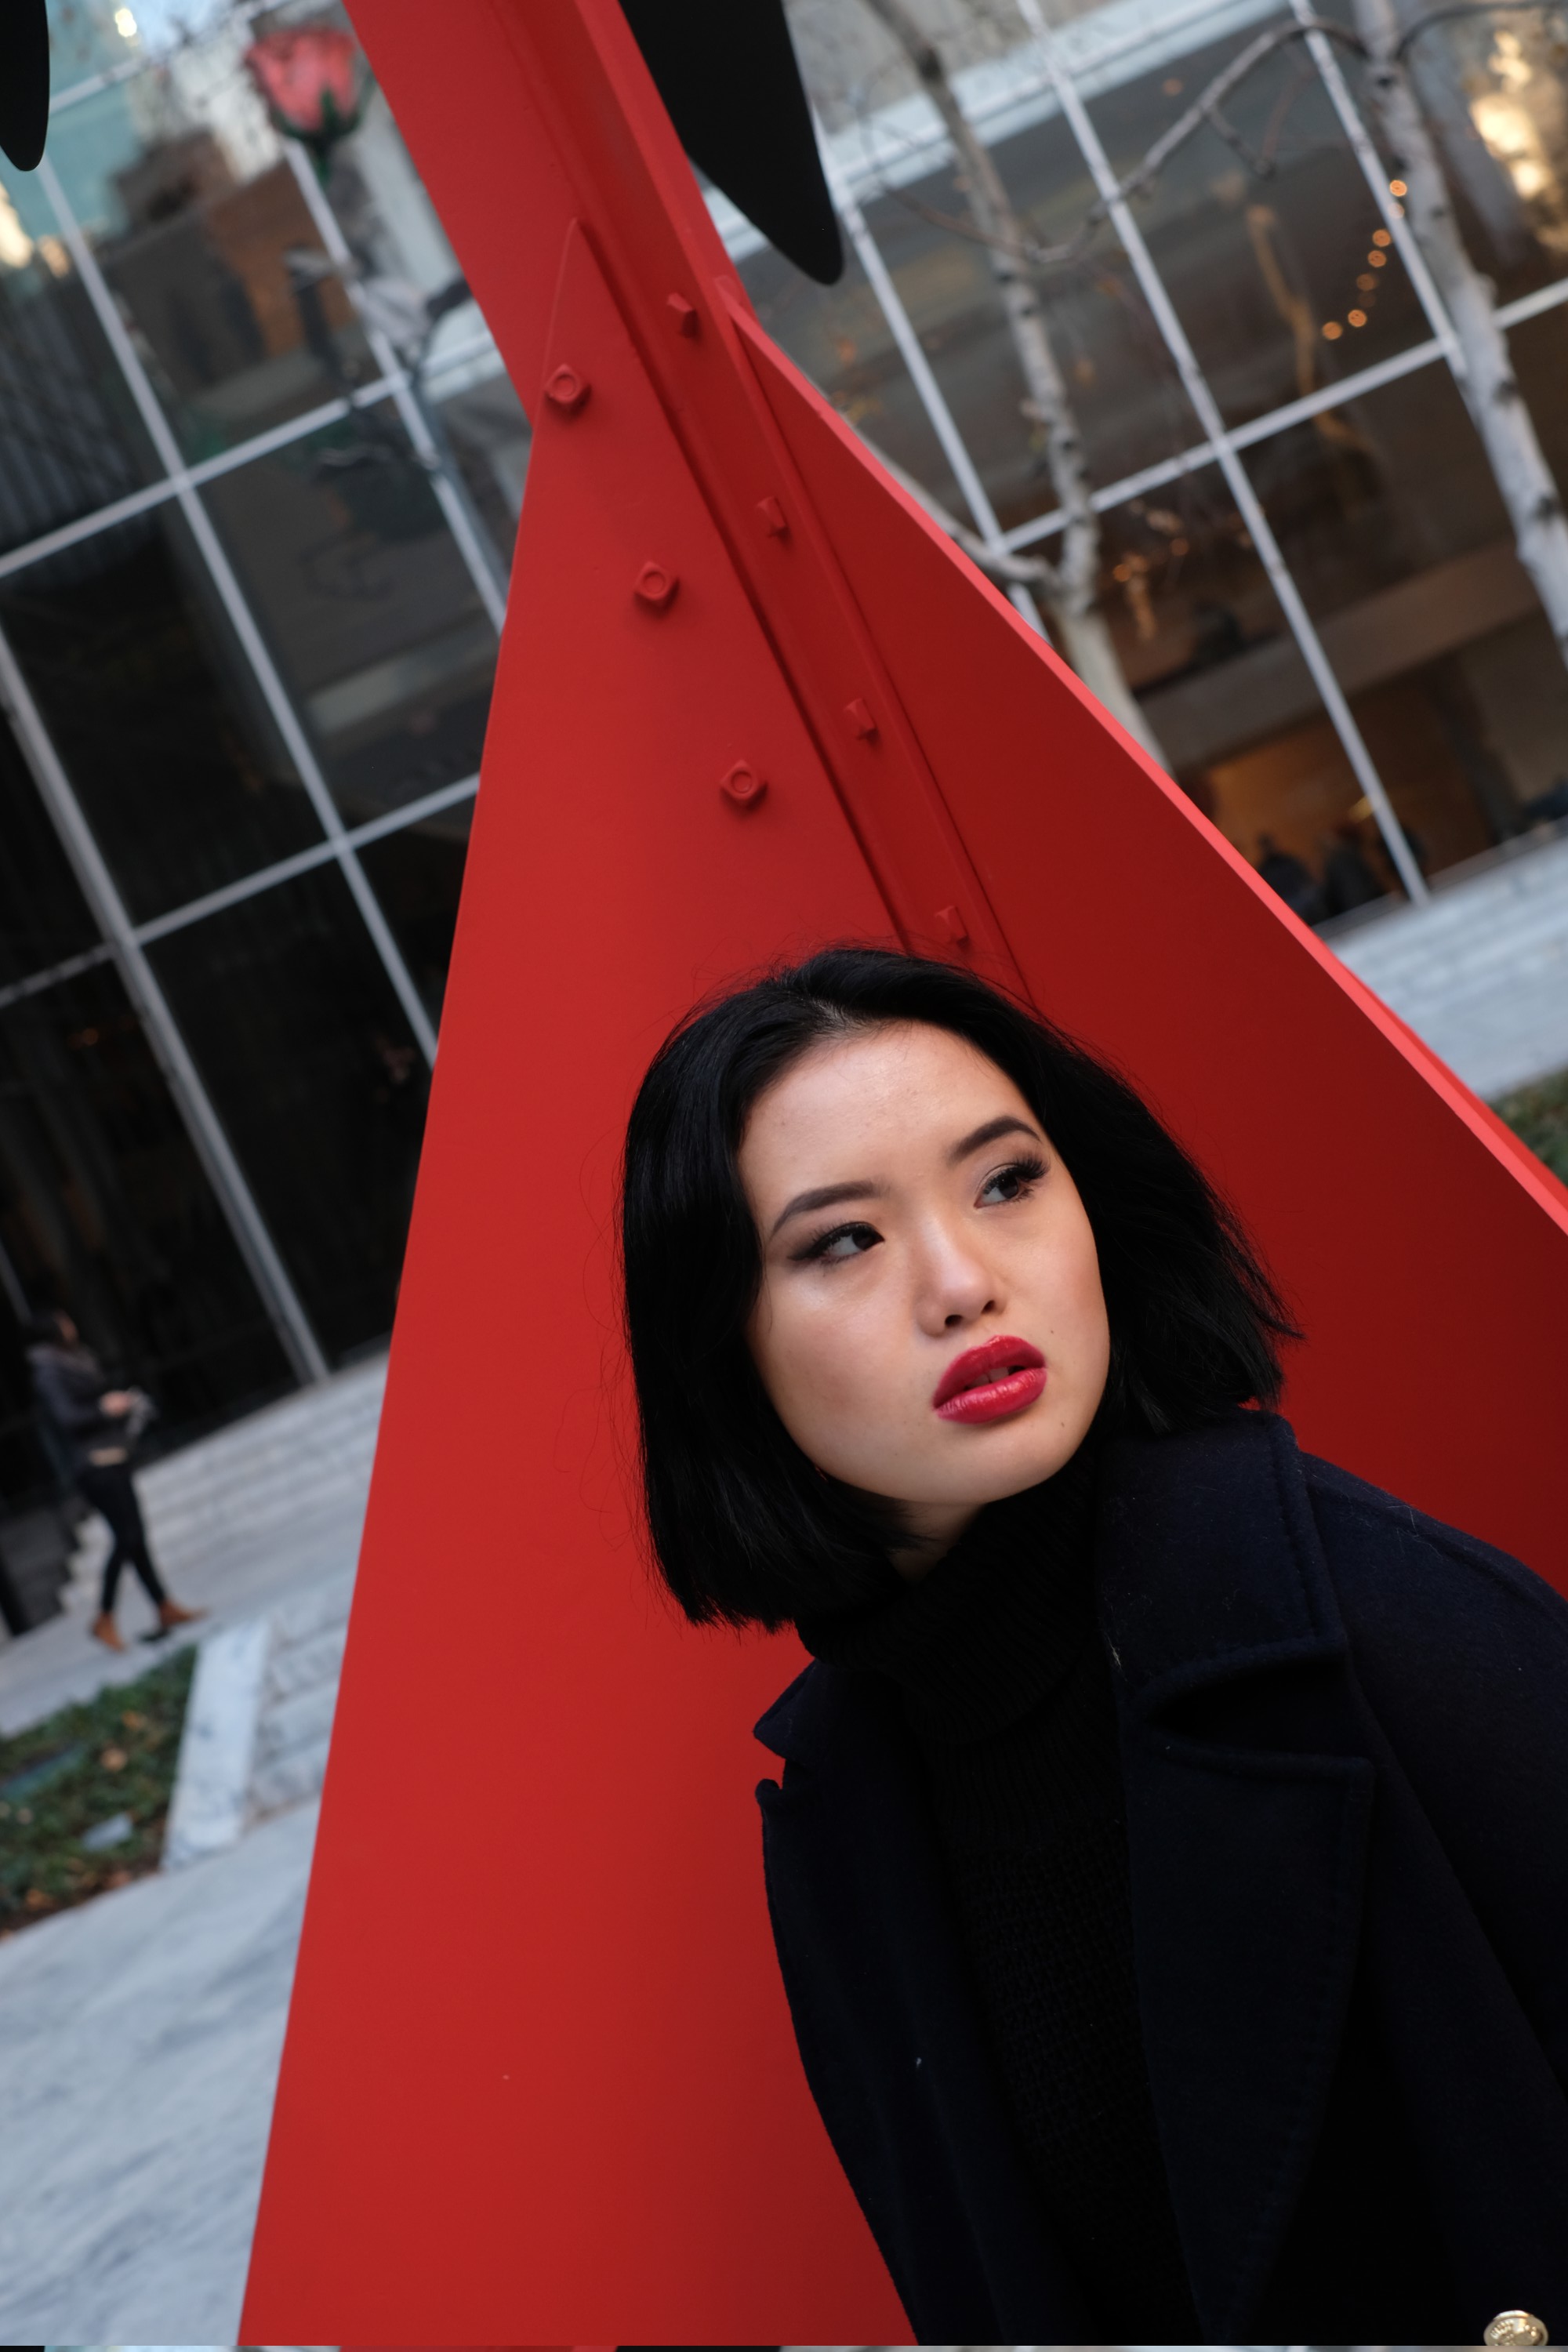 Chinese model by red Calder sculpture